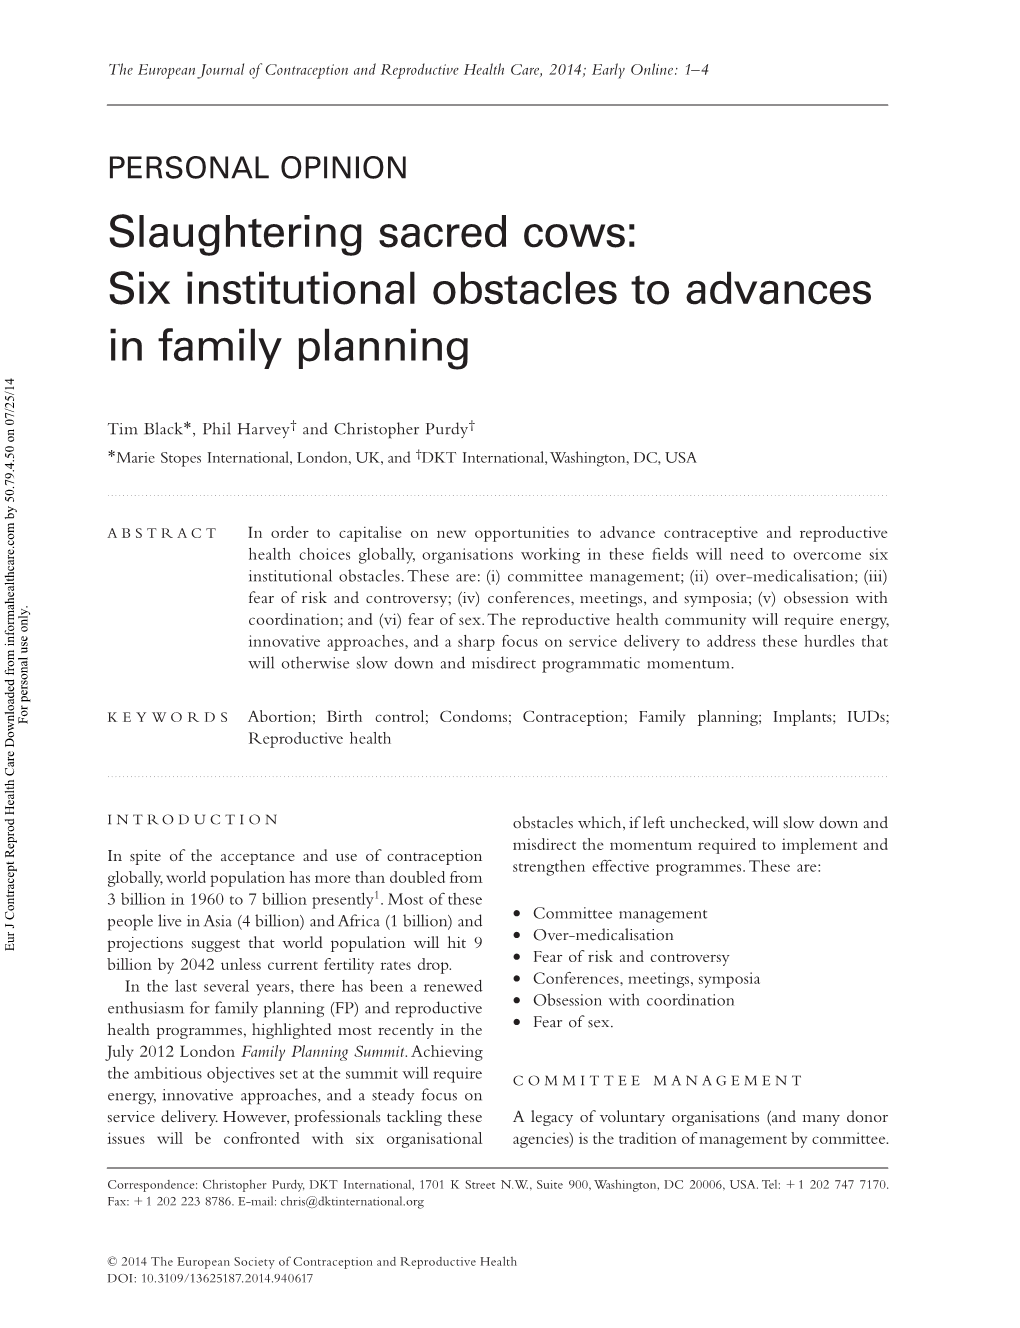 Six Institutional Obstacles to Advances in Family Planning